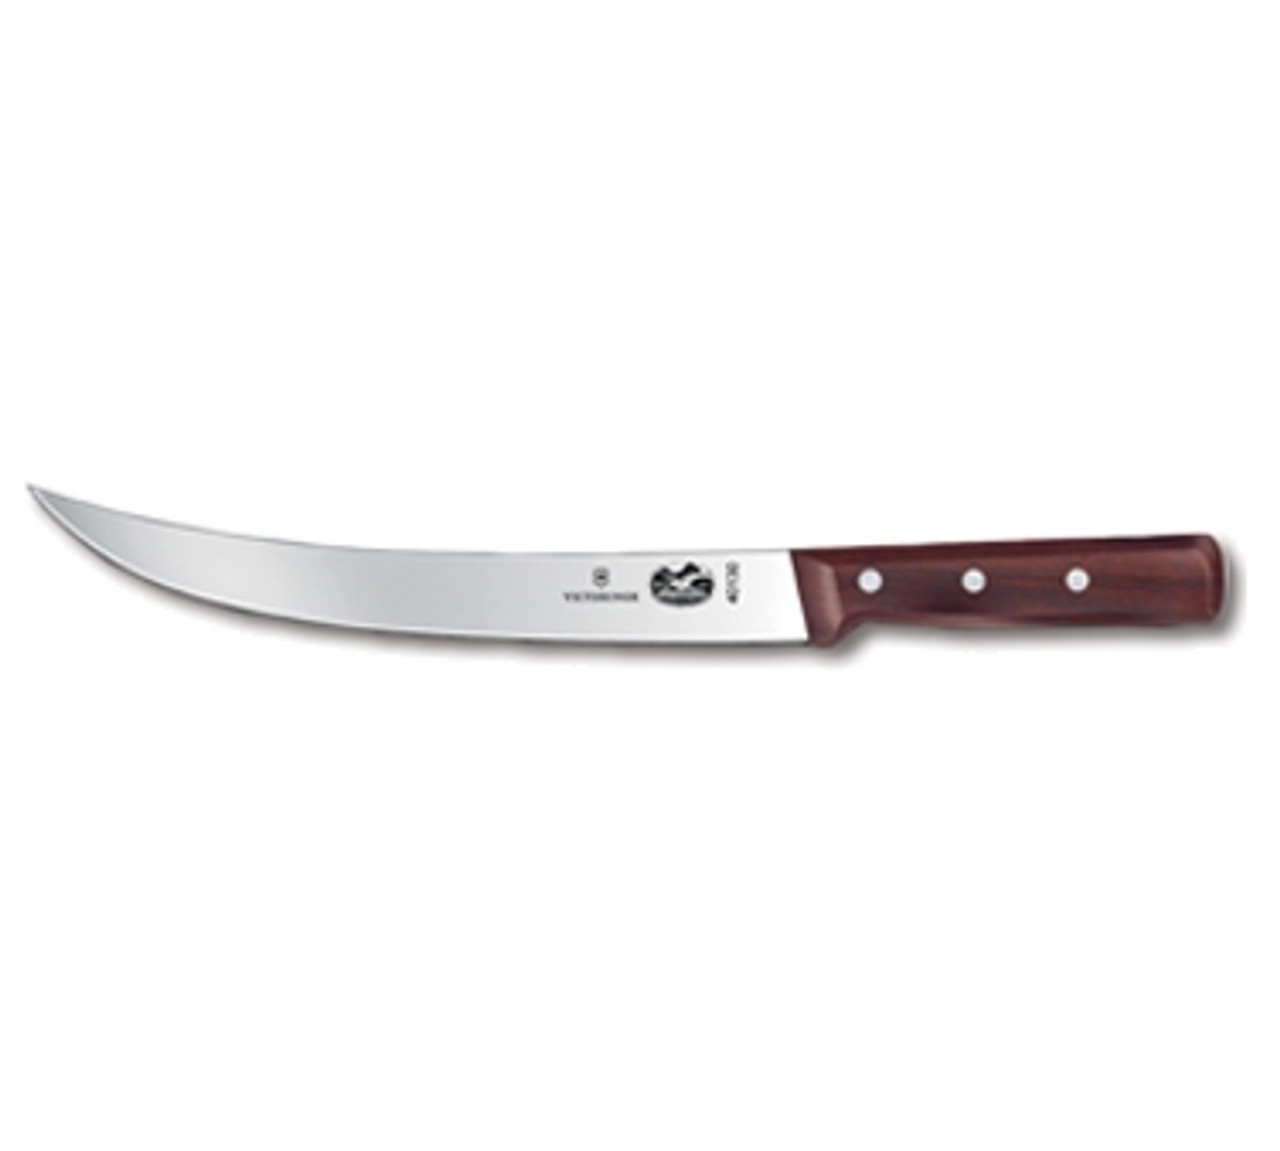 Victorinox 5.7200.25 10" Curved Breaking Knife with Rosewood Handle